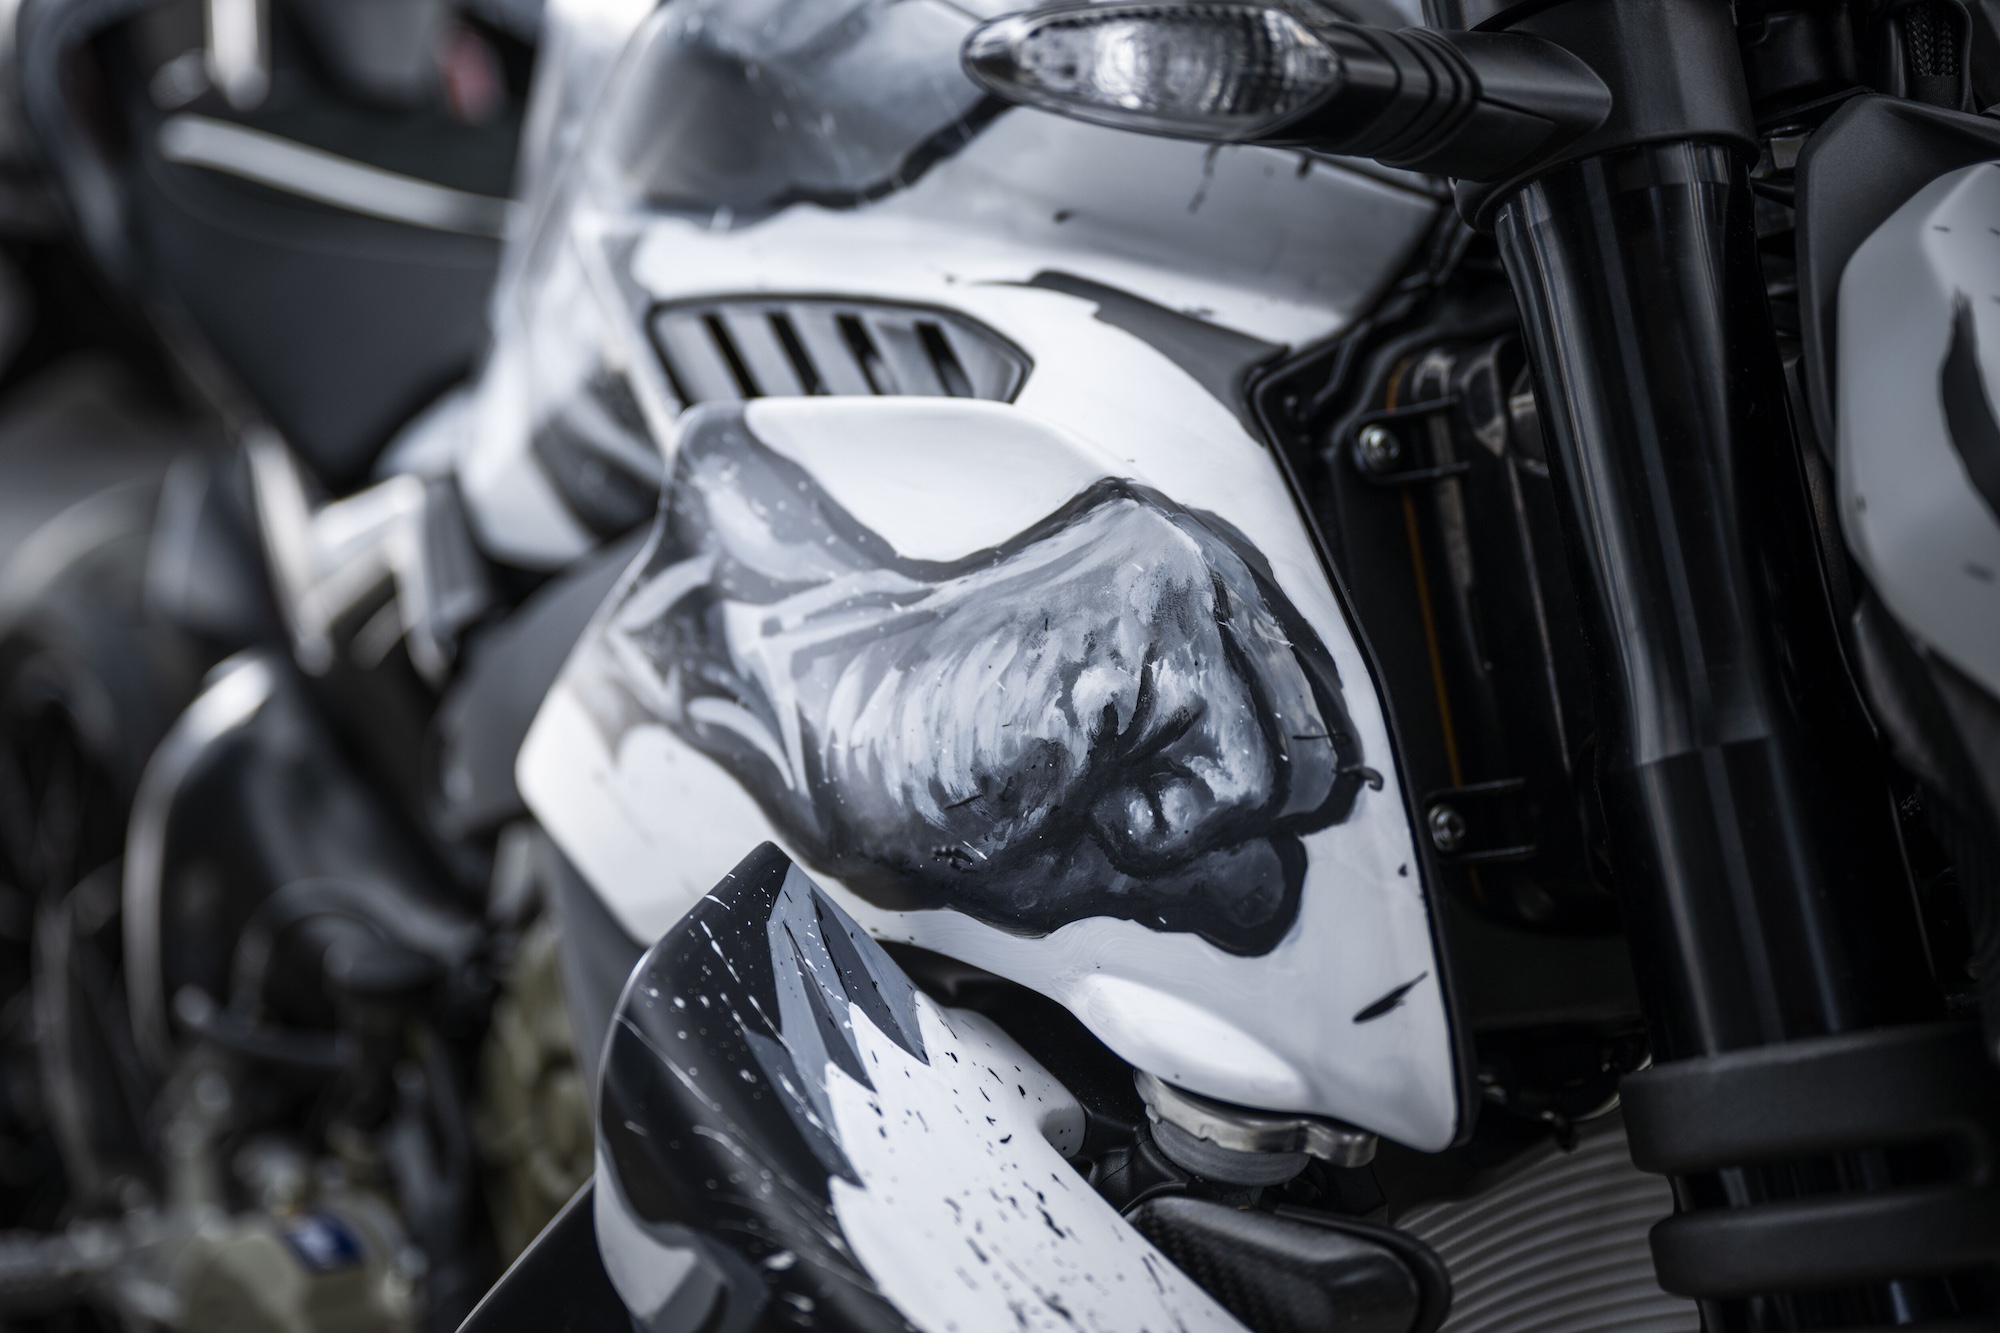 A close up of a customized motorcycle.